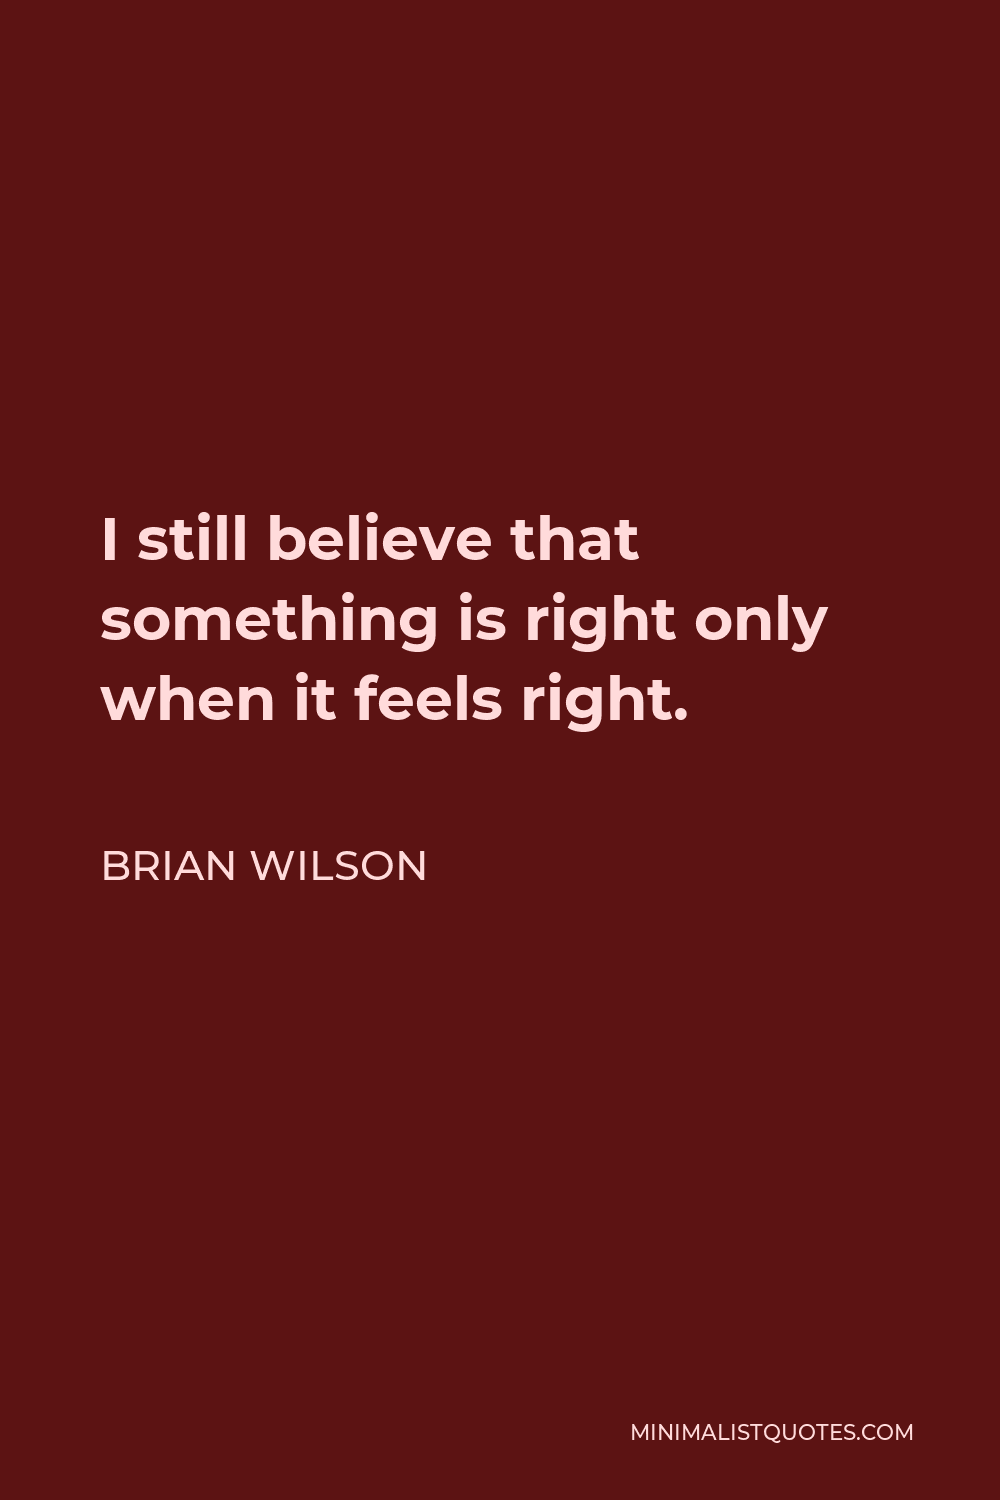 Brian Wilson Quote - I still believe that something is right only when it feels right.